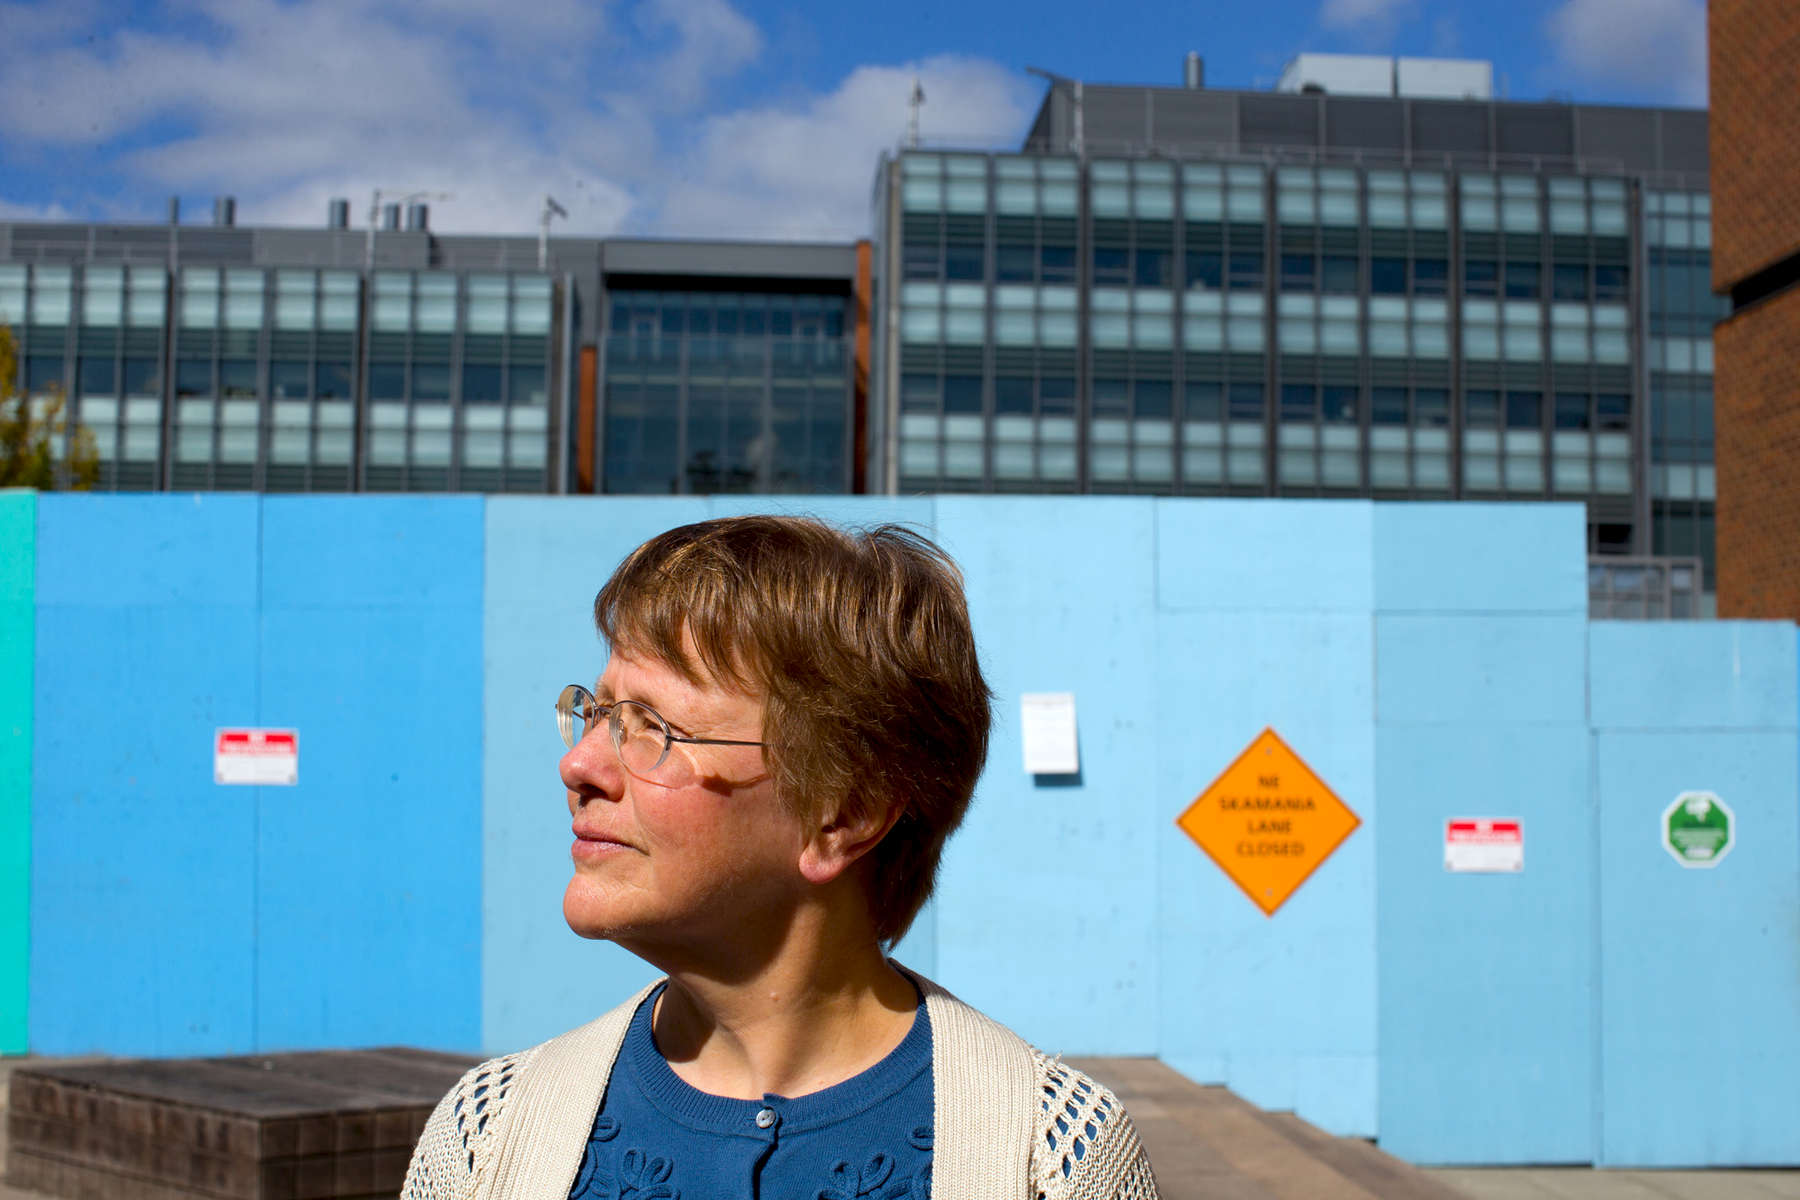 Kathy Bentson, a former research scientist in the Primate Center at the University of Washington, stands in front of a tall, blue wooden wall bearing No Trespassing signs that blocks the public's view of the construction of the new underground animal research lab in Seattle, Wash. on September 21, 2016. In the rear is the William H. Foege Building for Bioengineering and Genome Sciences. Bentson is trying to submit the results of a study she did with others on how to reduce the prevalence of abnormal behaviors in laboratory monkeys to peer review journals, but has met a lot of resistance from the university. (© Karen Ducey Photography)